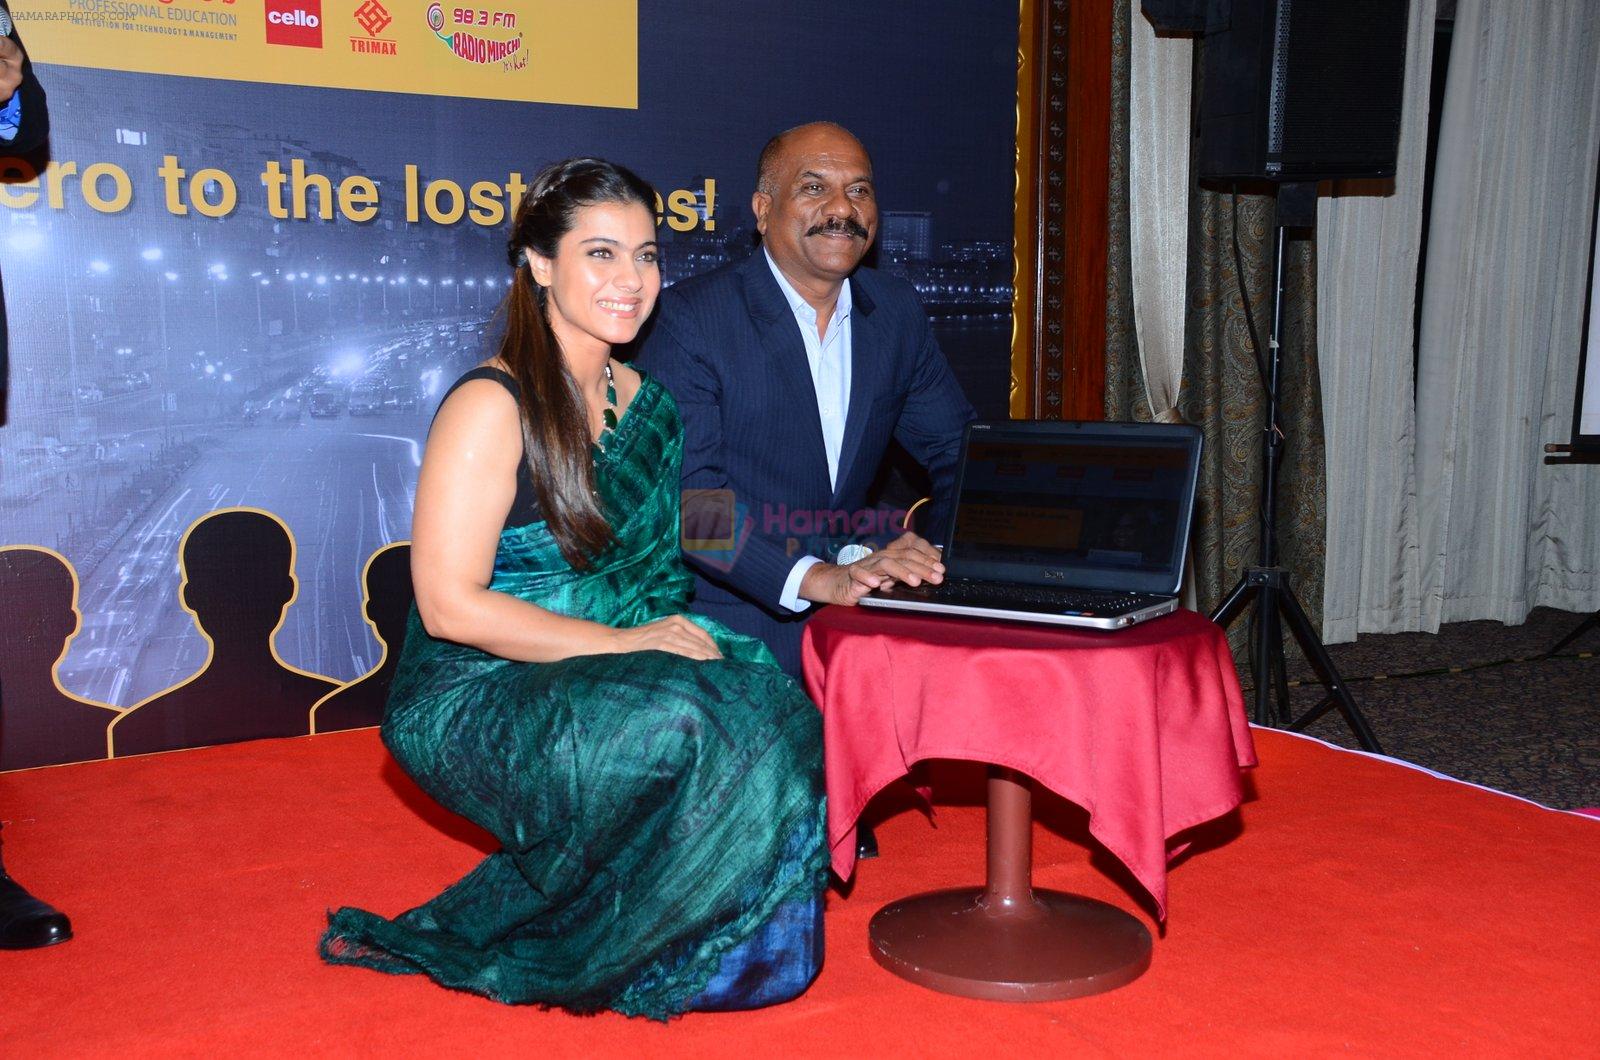 Kajol at Missing people site launch  on 27th Jan 2016